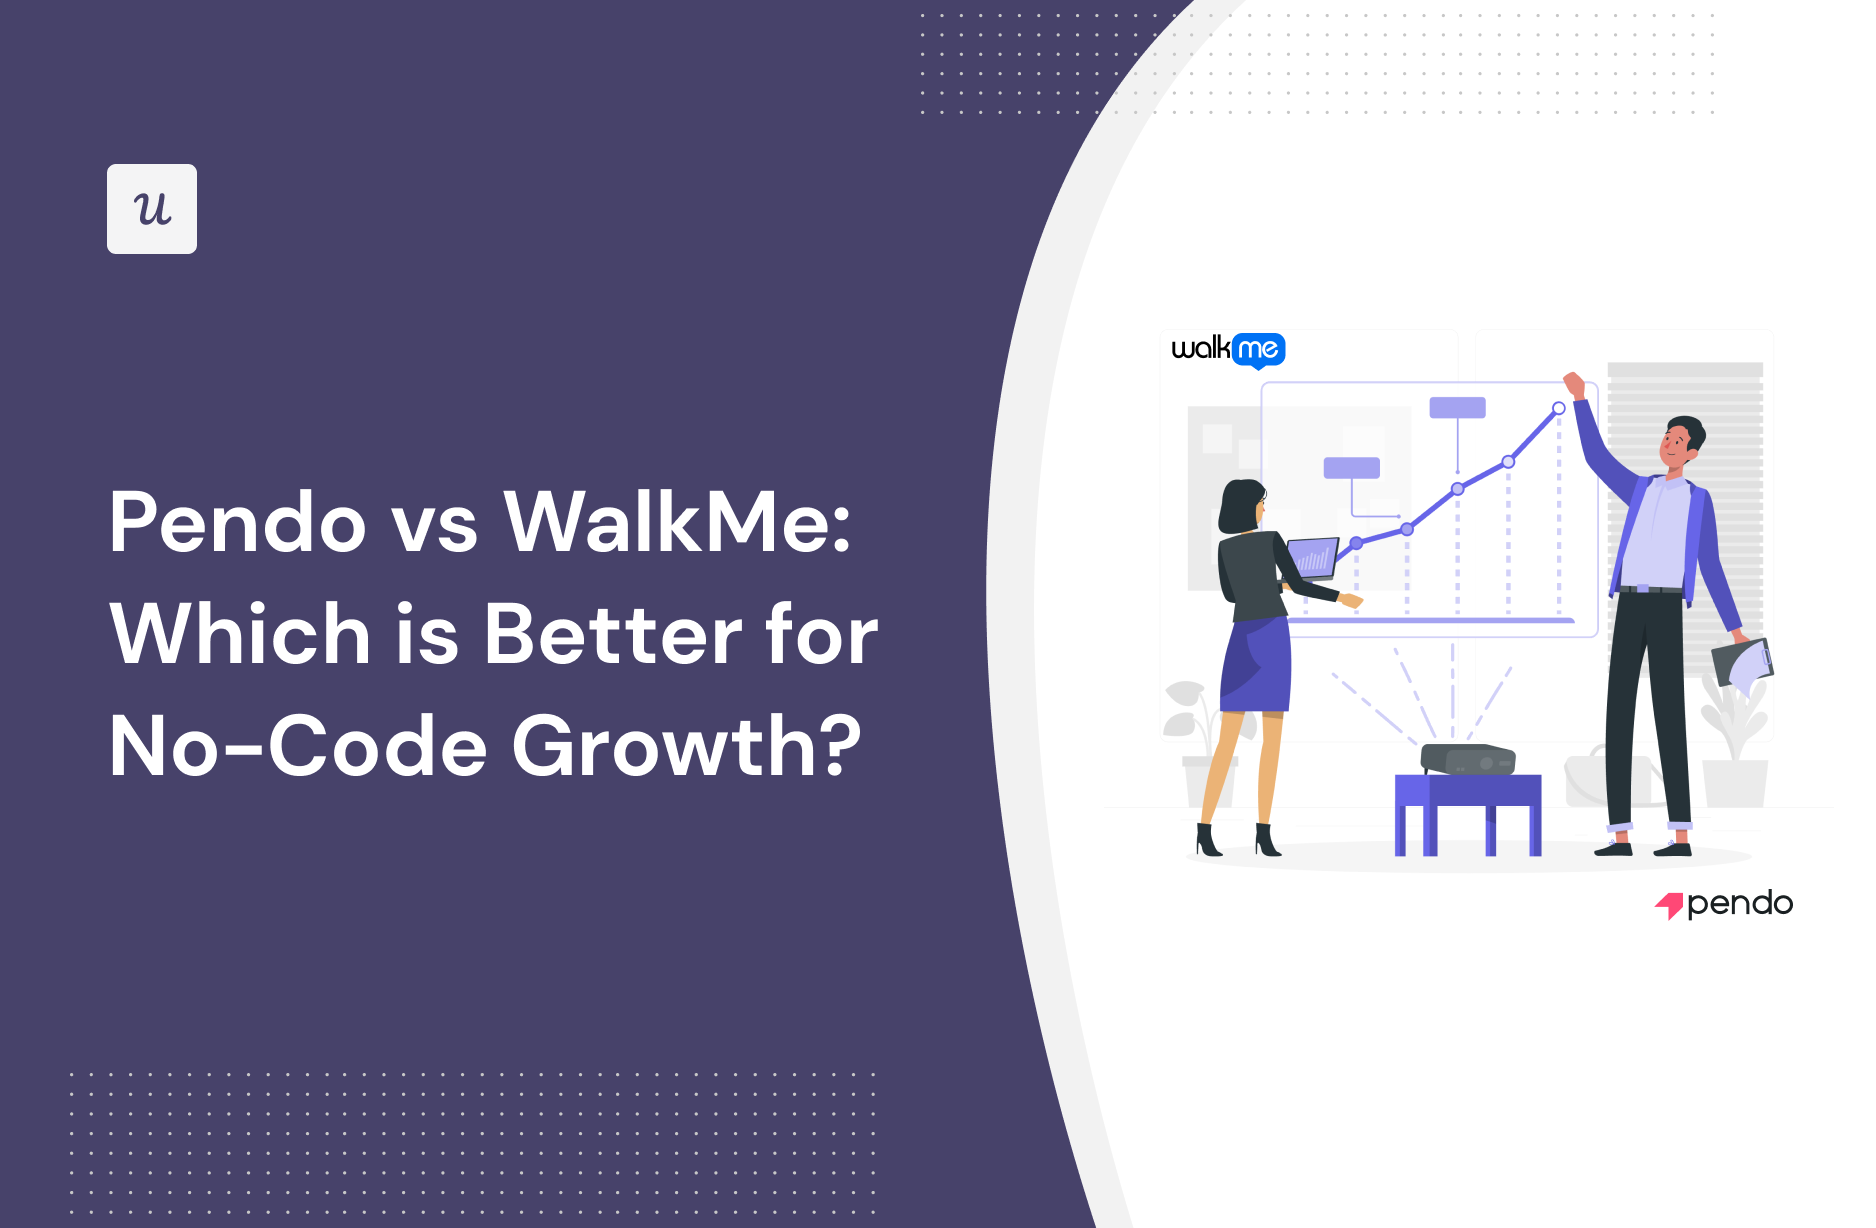 Pendo vs WalkMe: Which is Better for No-Code Growth?